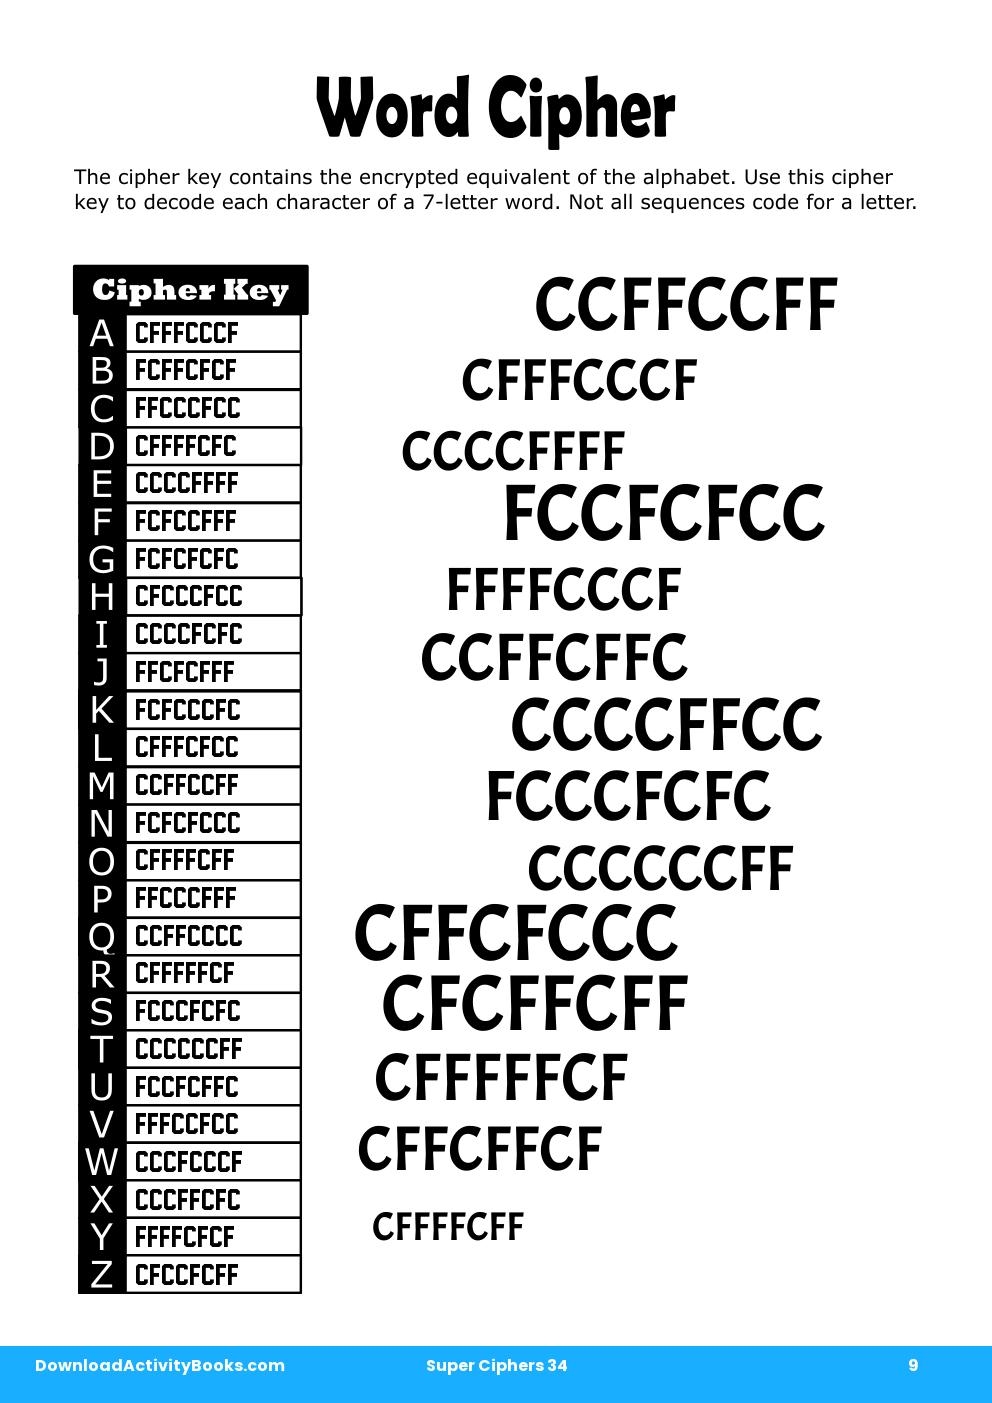 Word Cipher in Super Ciphers 34